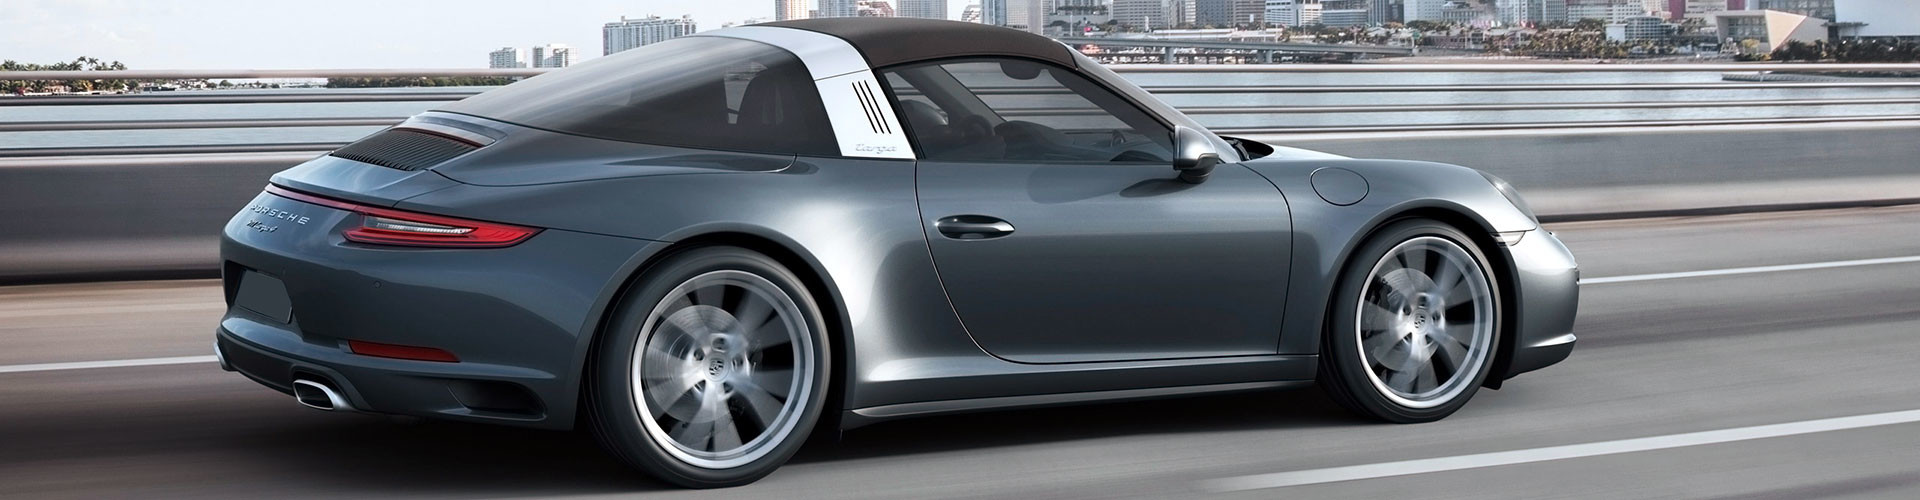 Buying Guide for Porsche 911 991 - What you need to know